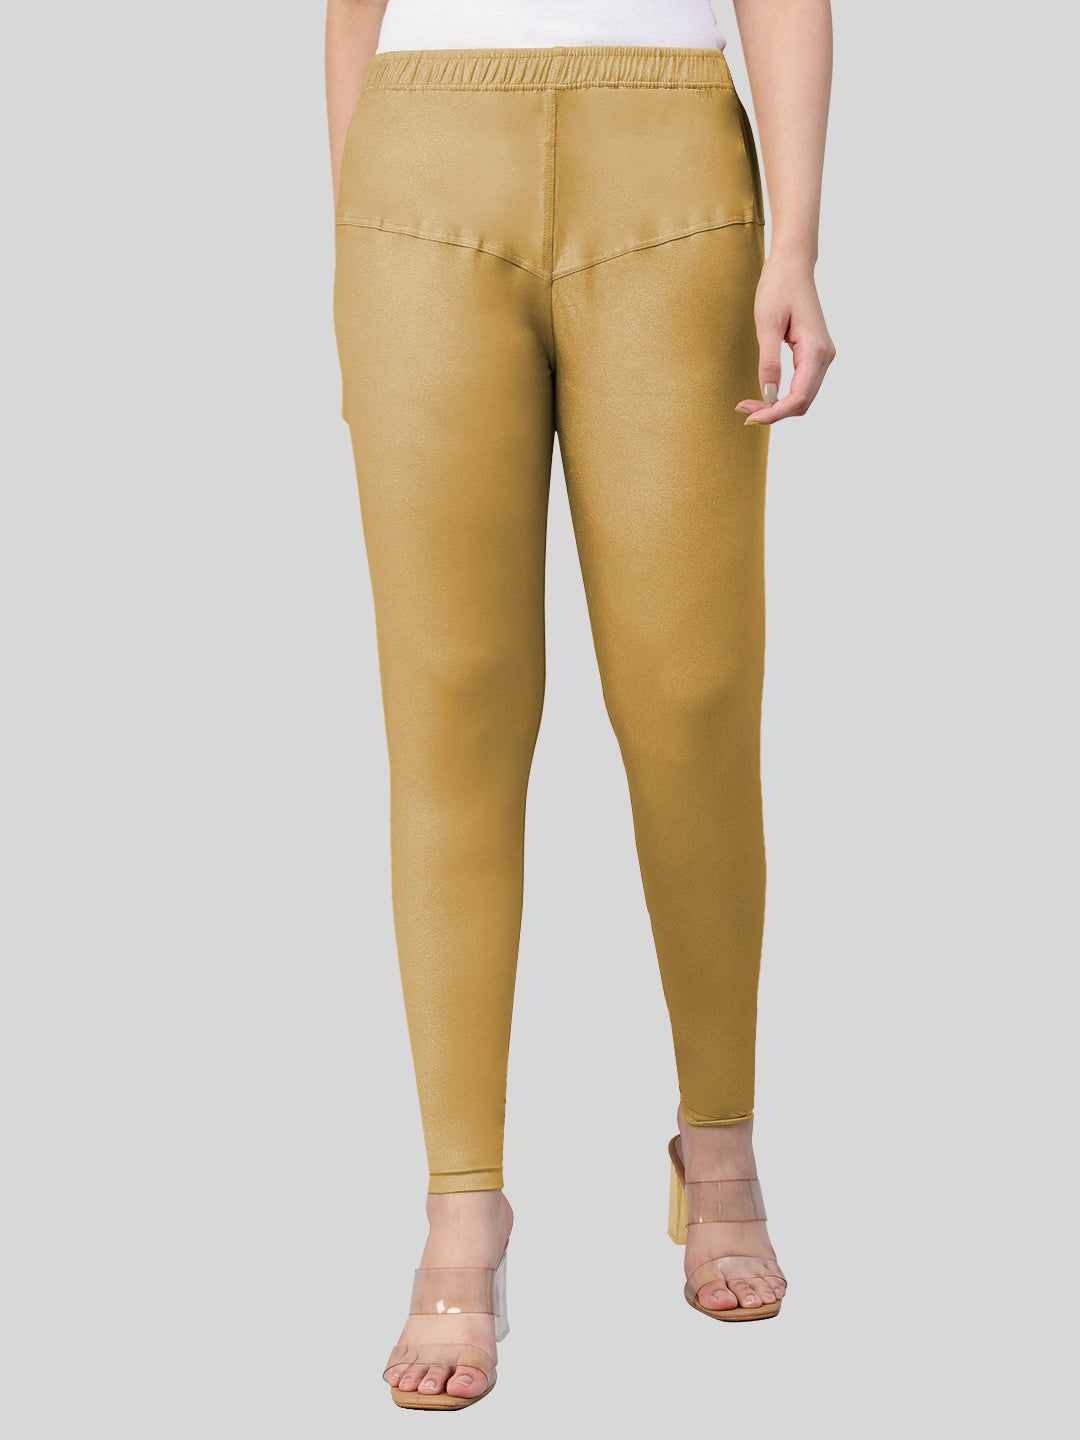 LUX Lyra Ankle Length Perfect Fitting Leggings – Online Shopping site in  India